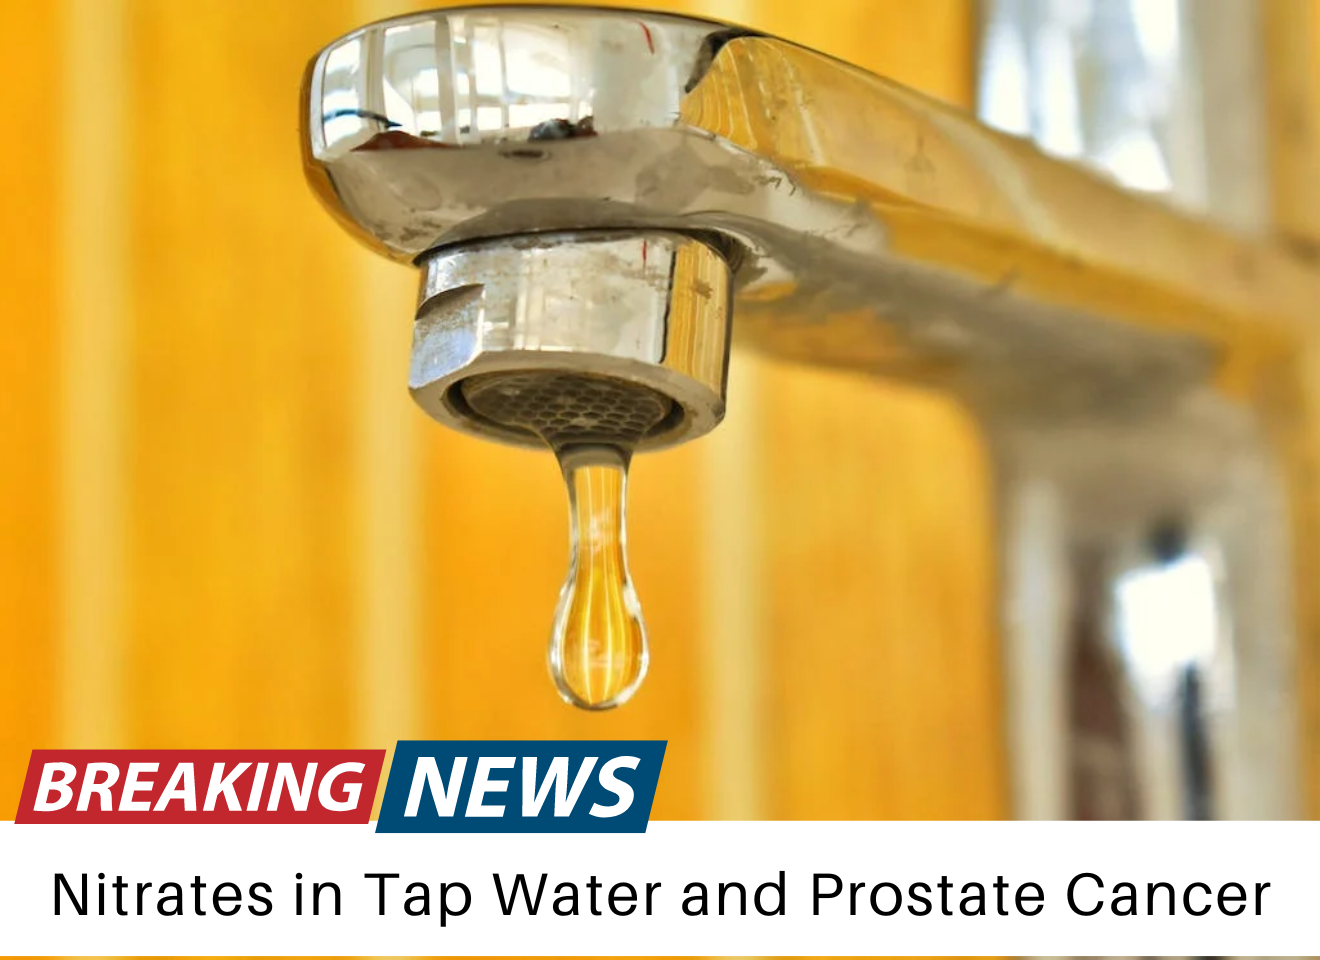 Nitrates in Tap Water & Prostate Cancer: Breaking News